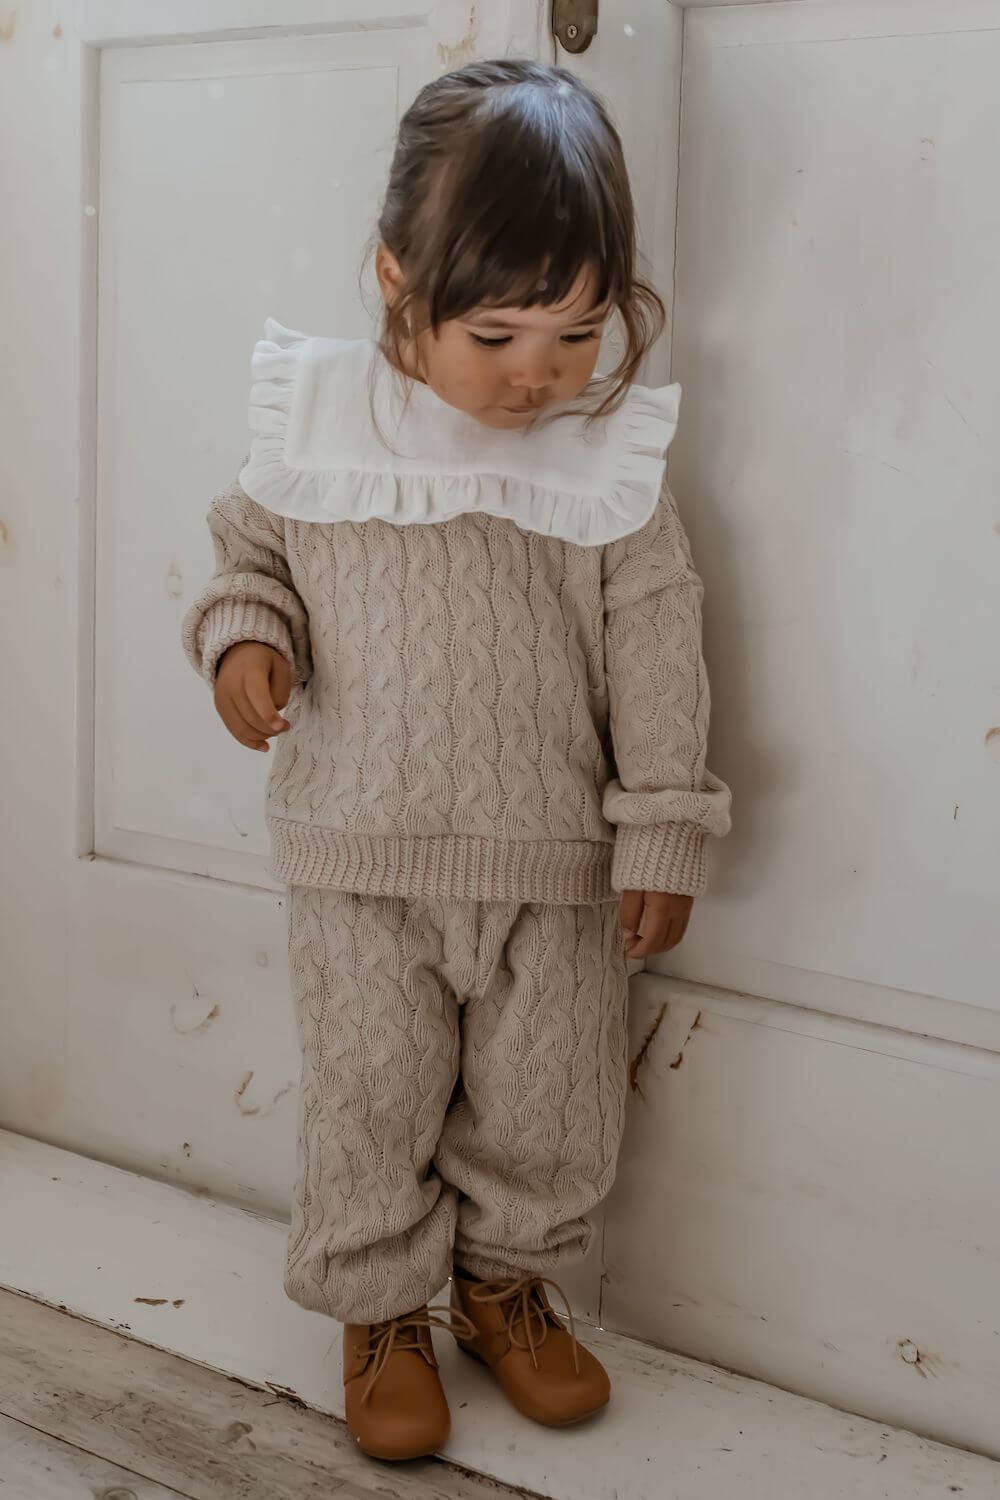 Braided set with square muslin collar